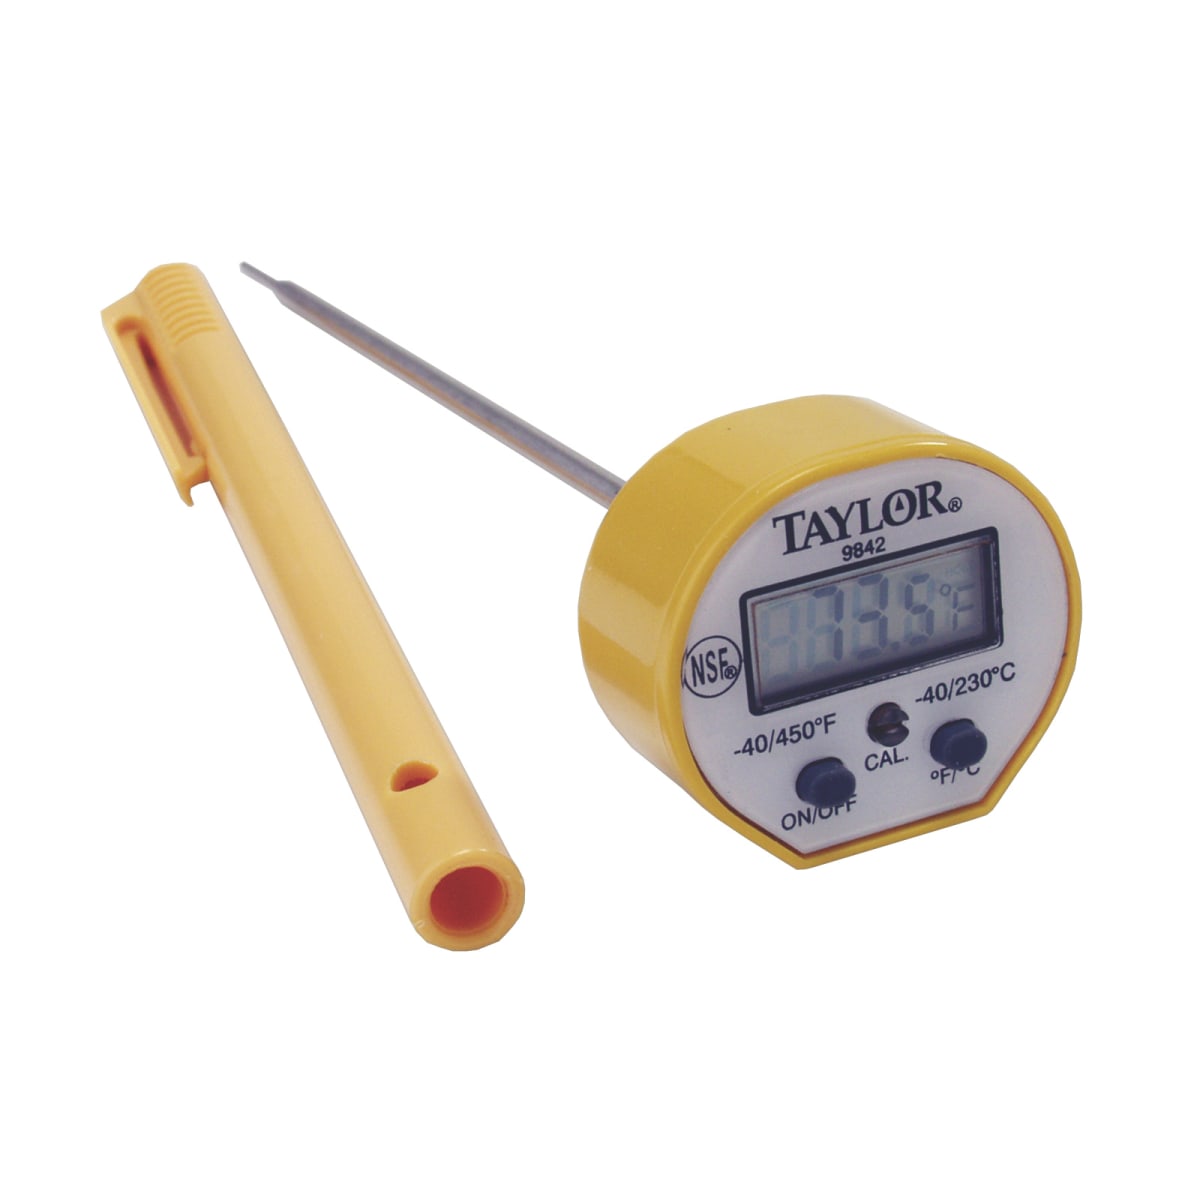 Taylor Precision Products taylor digital cooking probe thermometer and timer